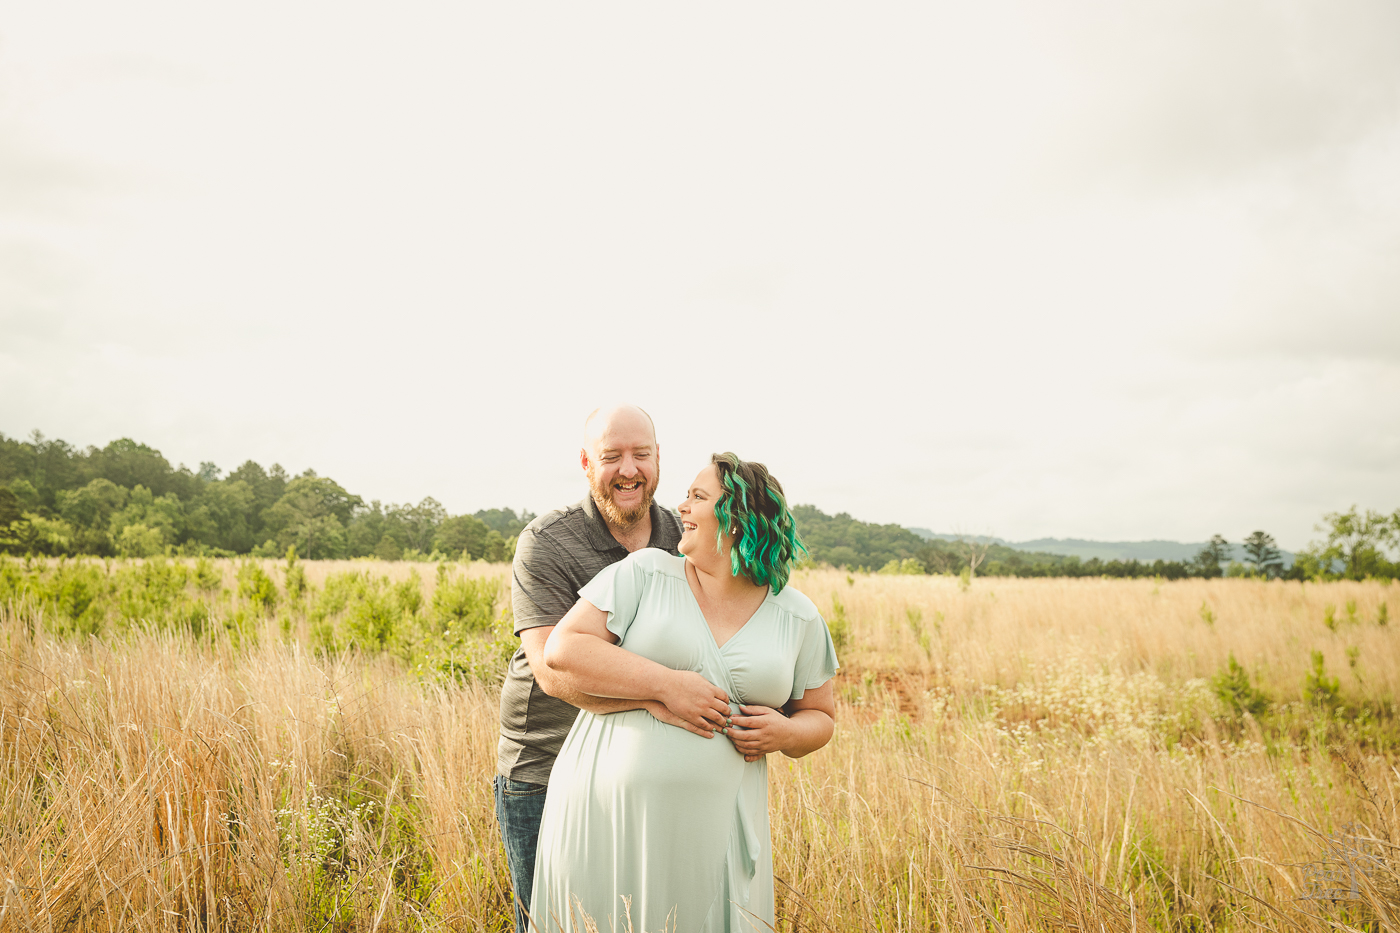 Pregnant couple holding each other and laughing in a field of tall grasses